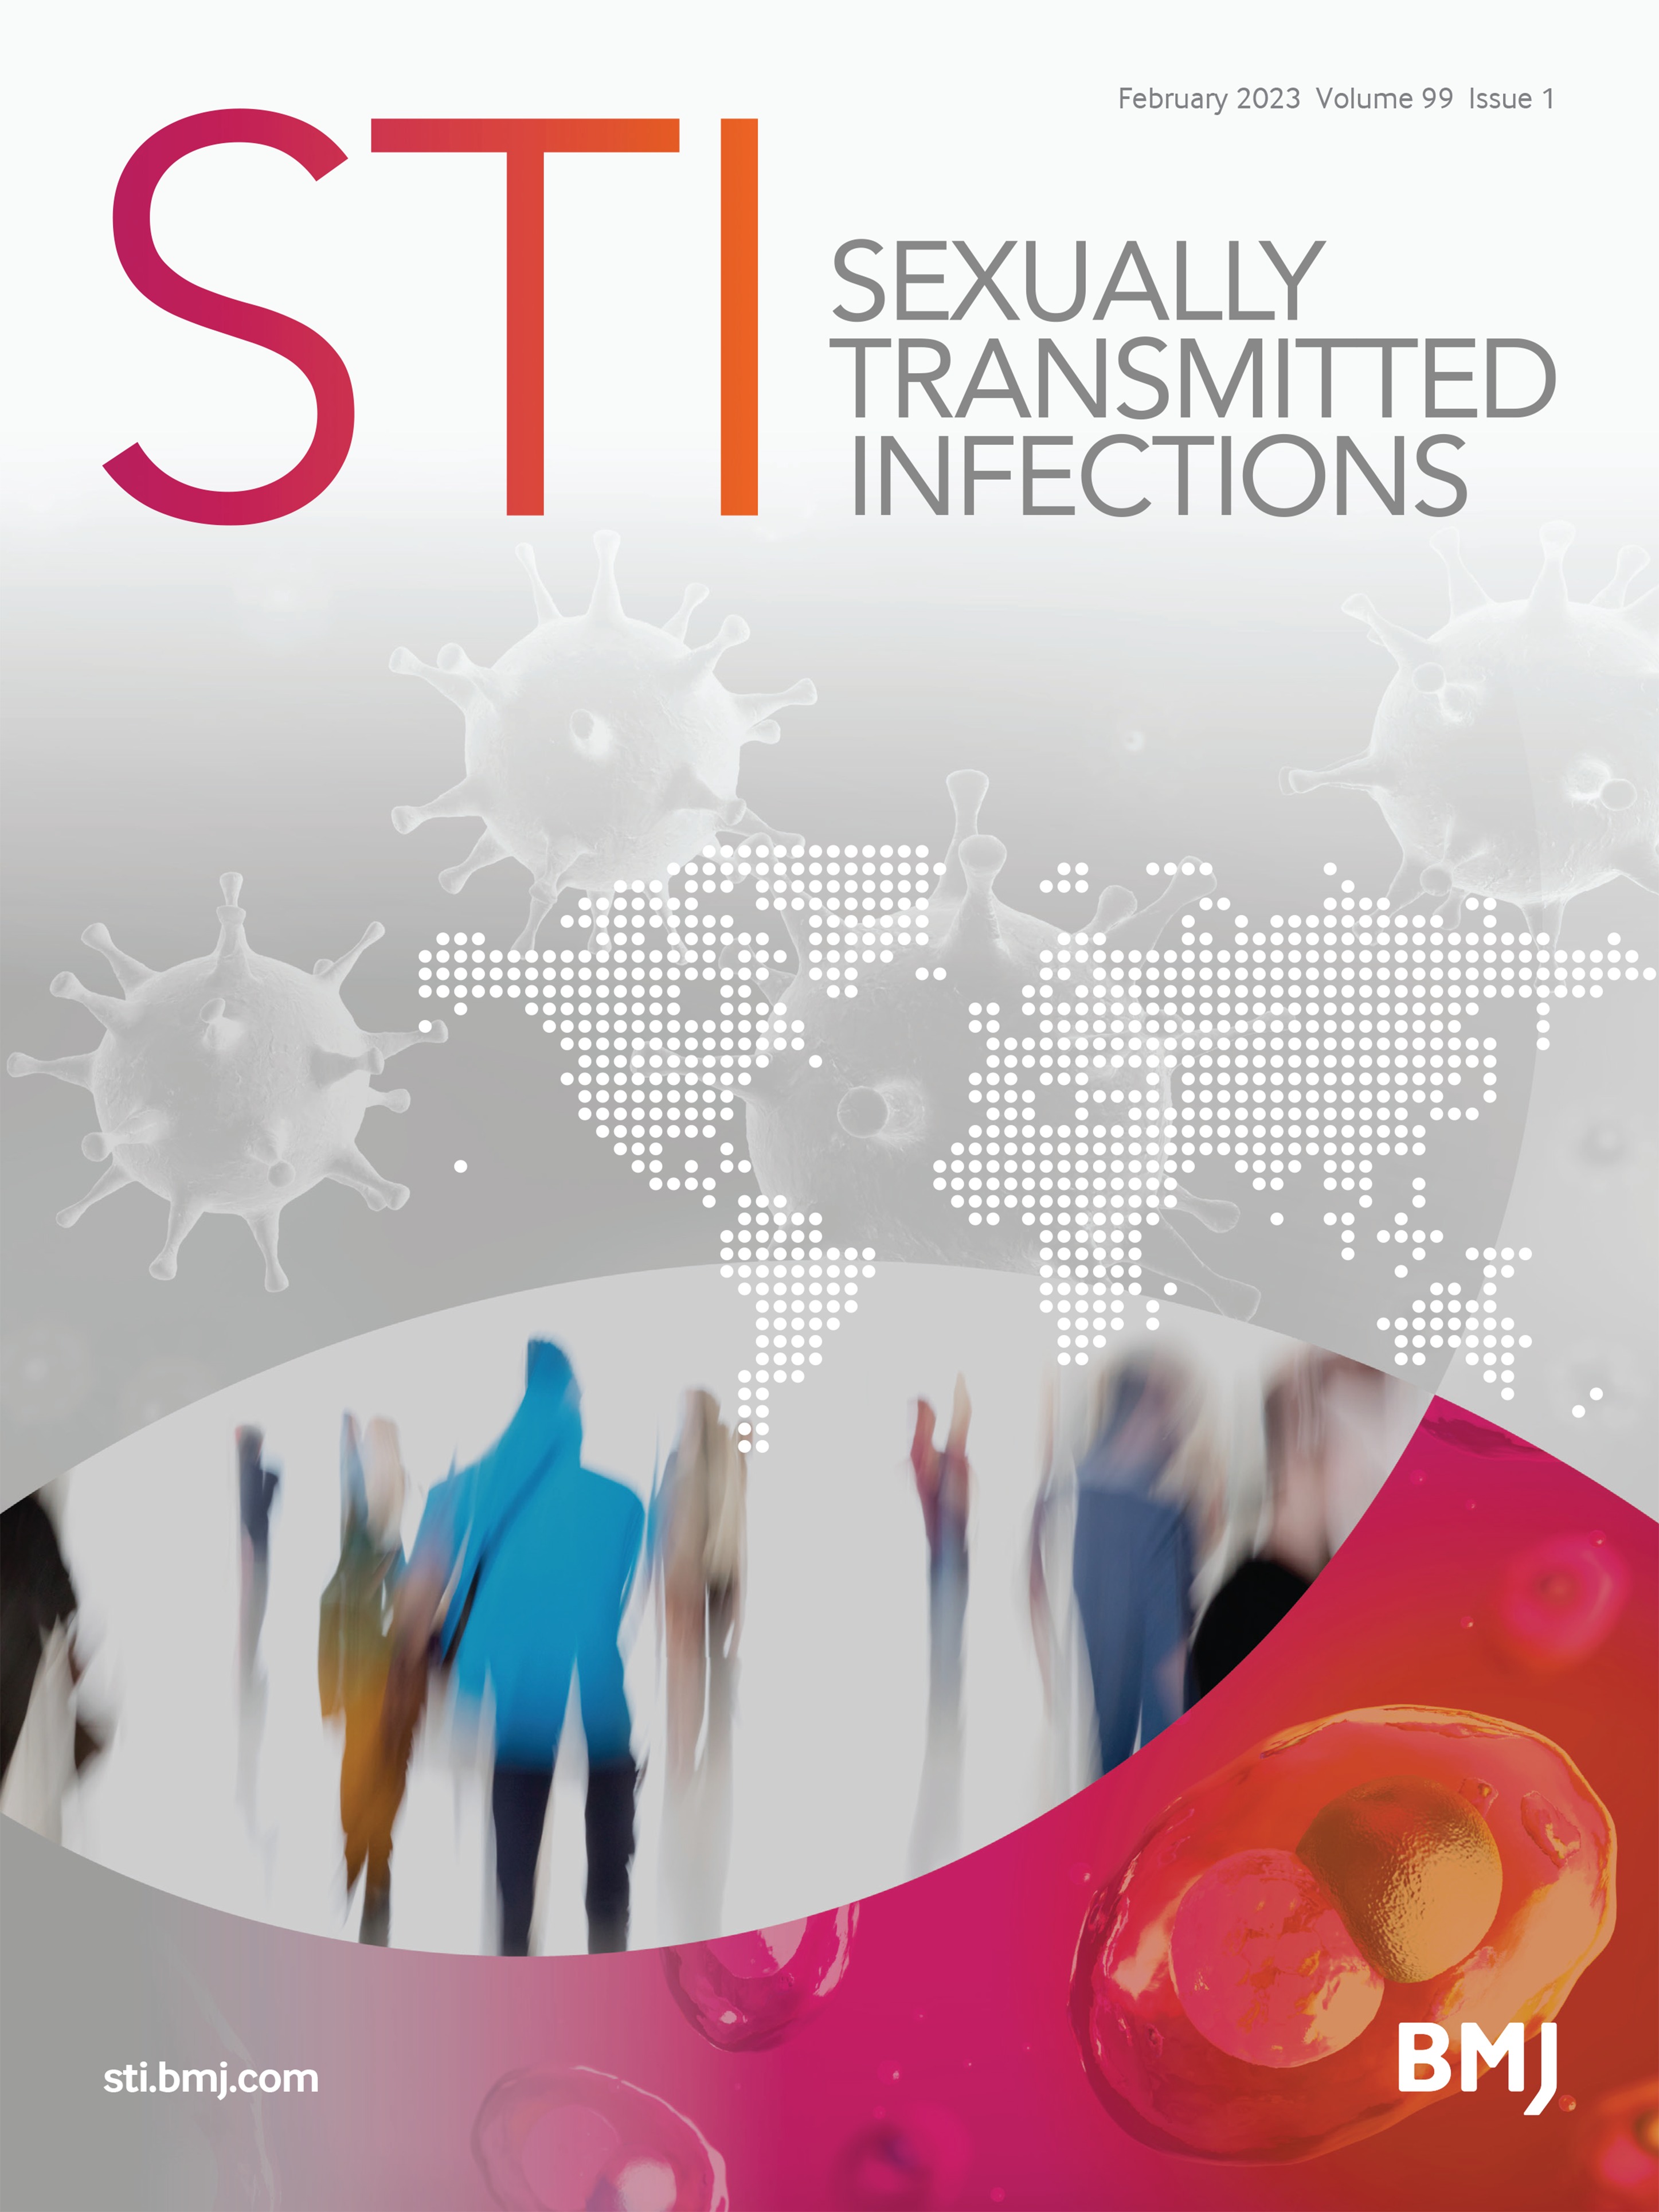 Environmental contamination by Chlamydia trachomatis and Neisseria gonorrhoeae: is it time to change our infection control practices? Results of a regional study